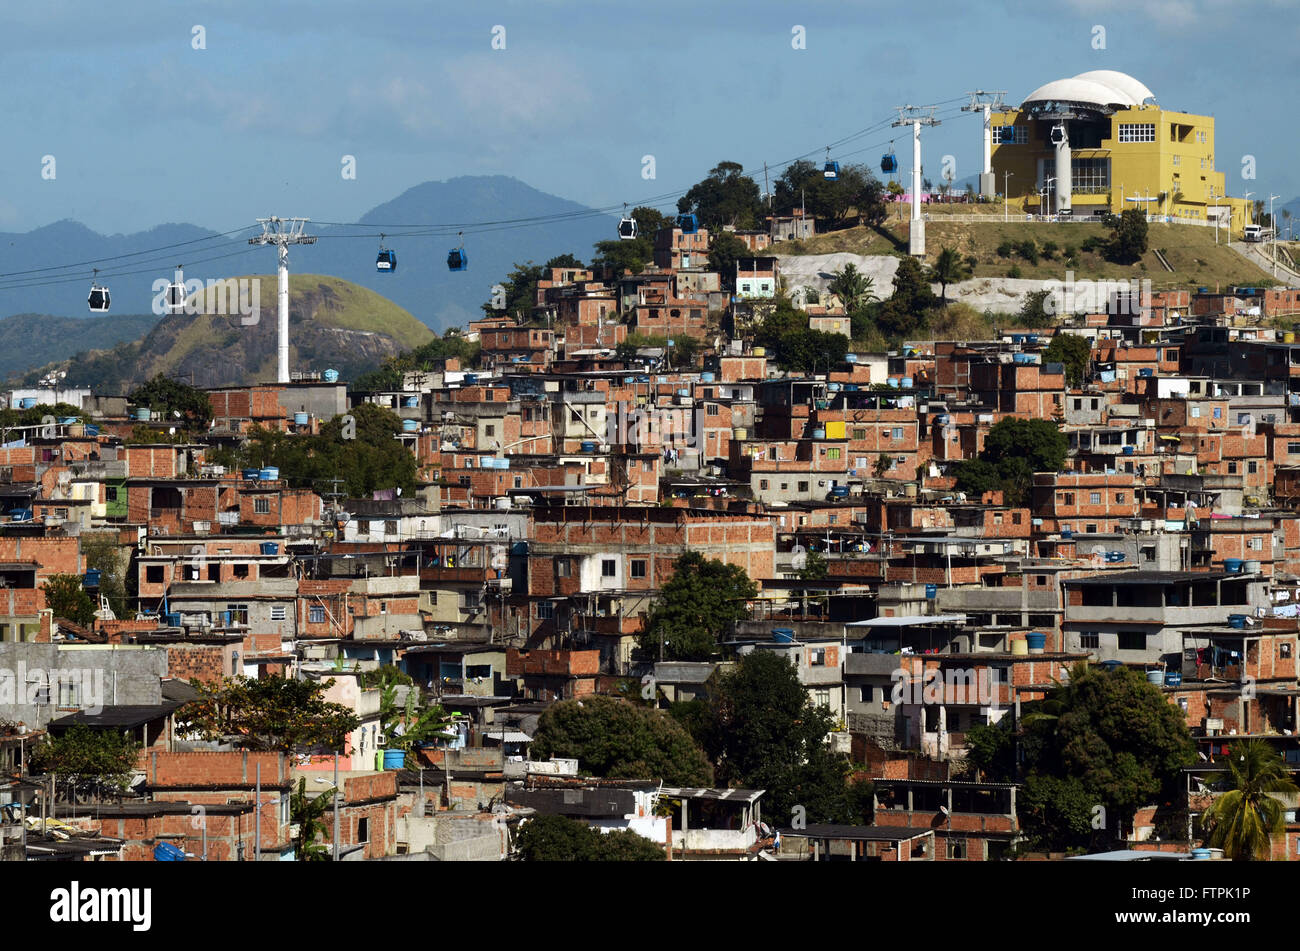 Cable car in the Complexo do Alemao slum - set of 13 slums in the north Stock Photo